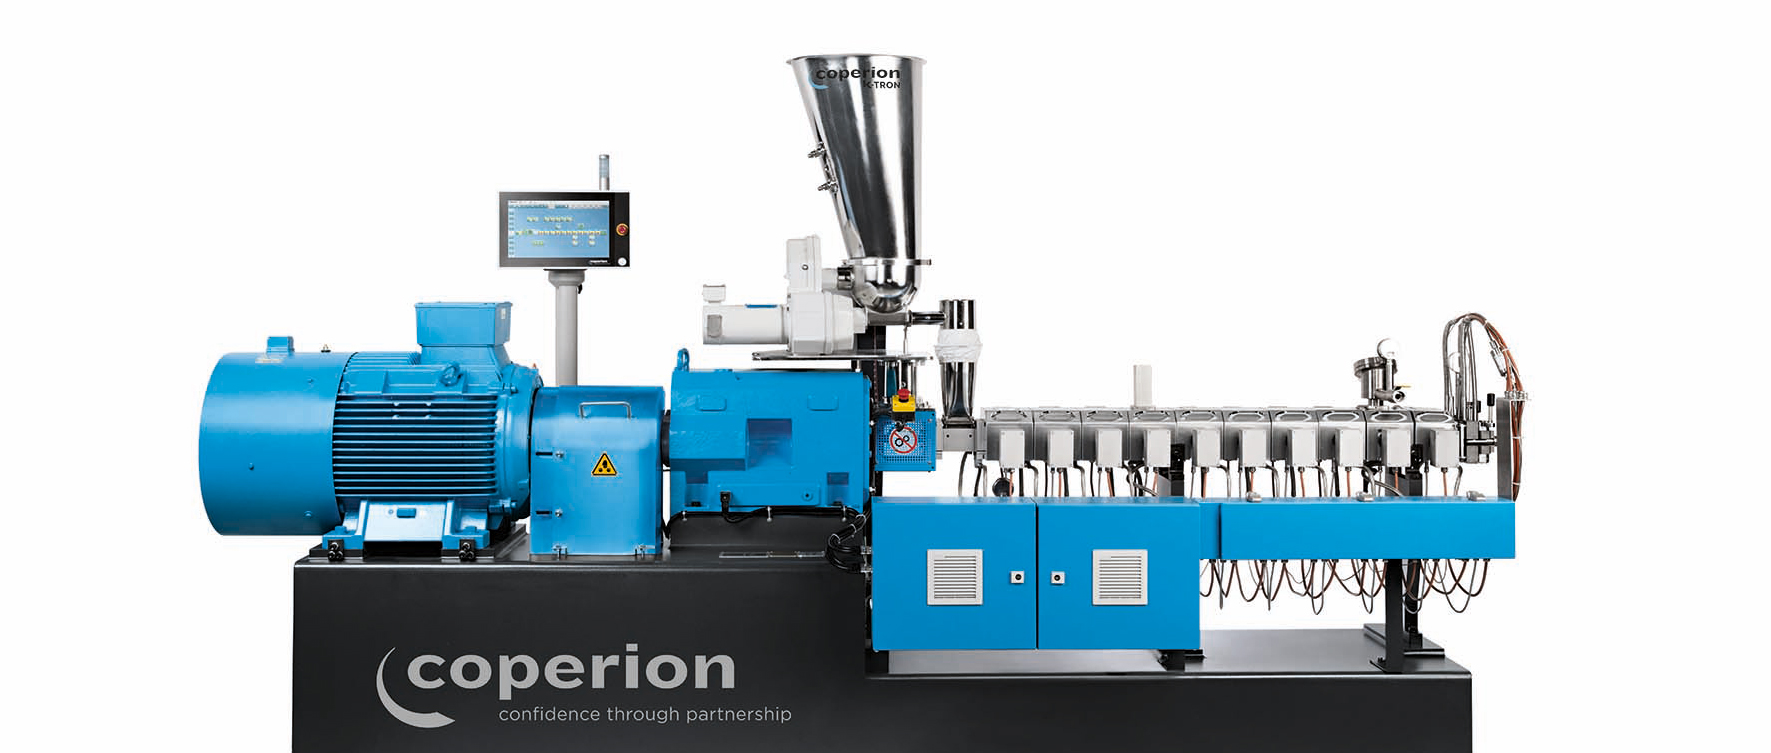  Coperion STS35Mc11 extruder